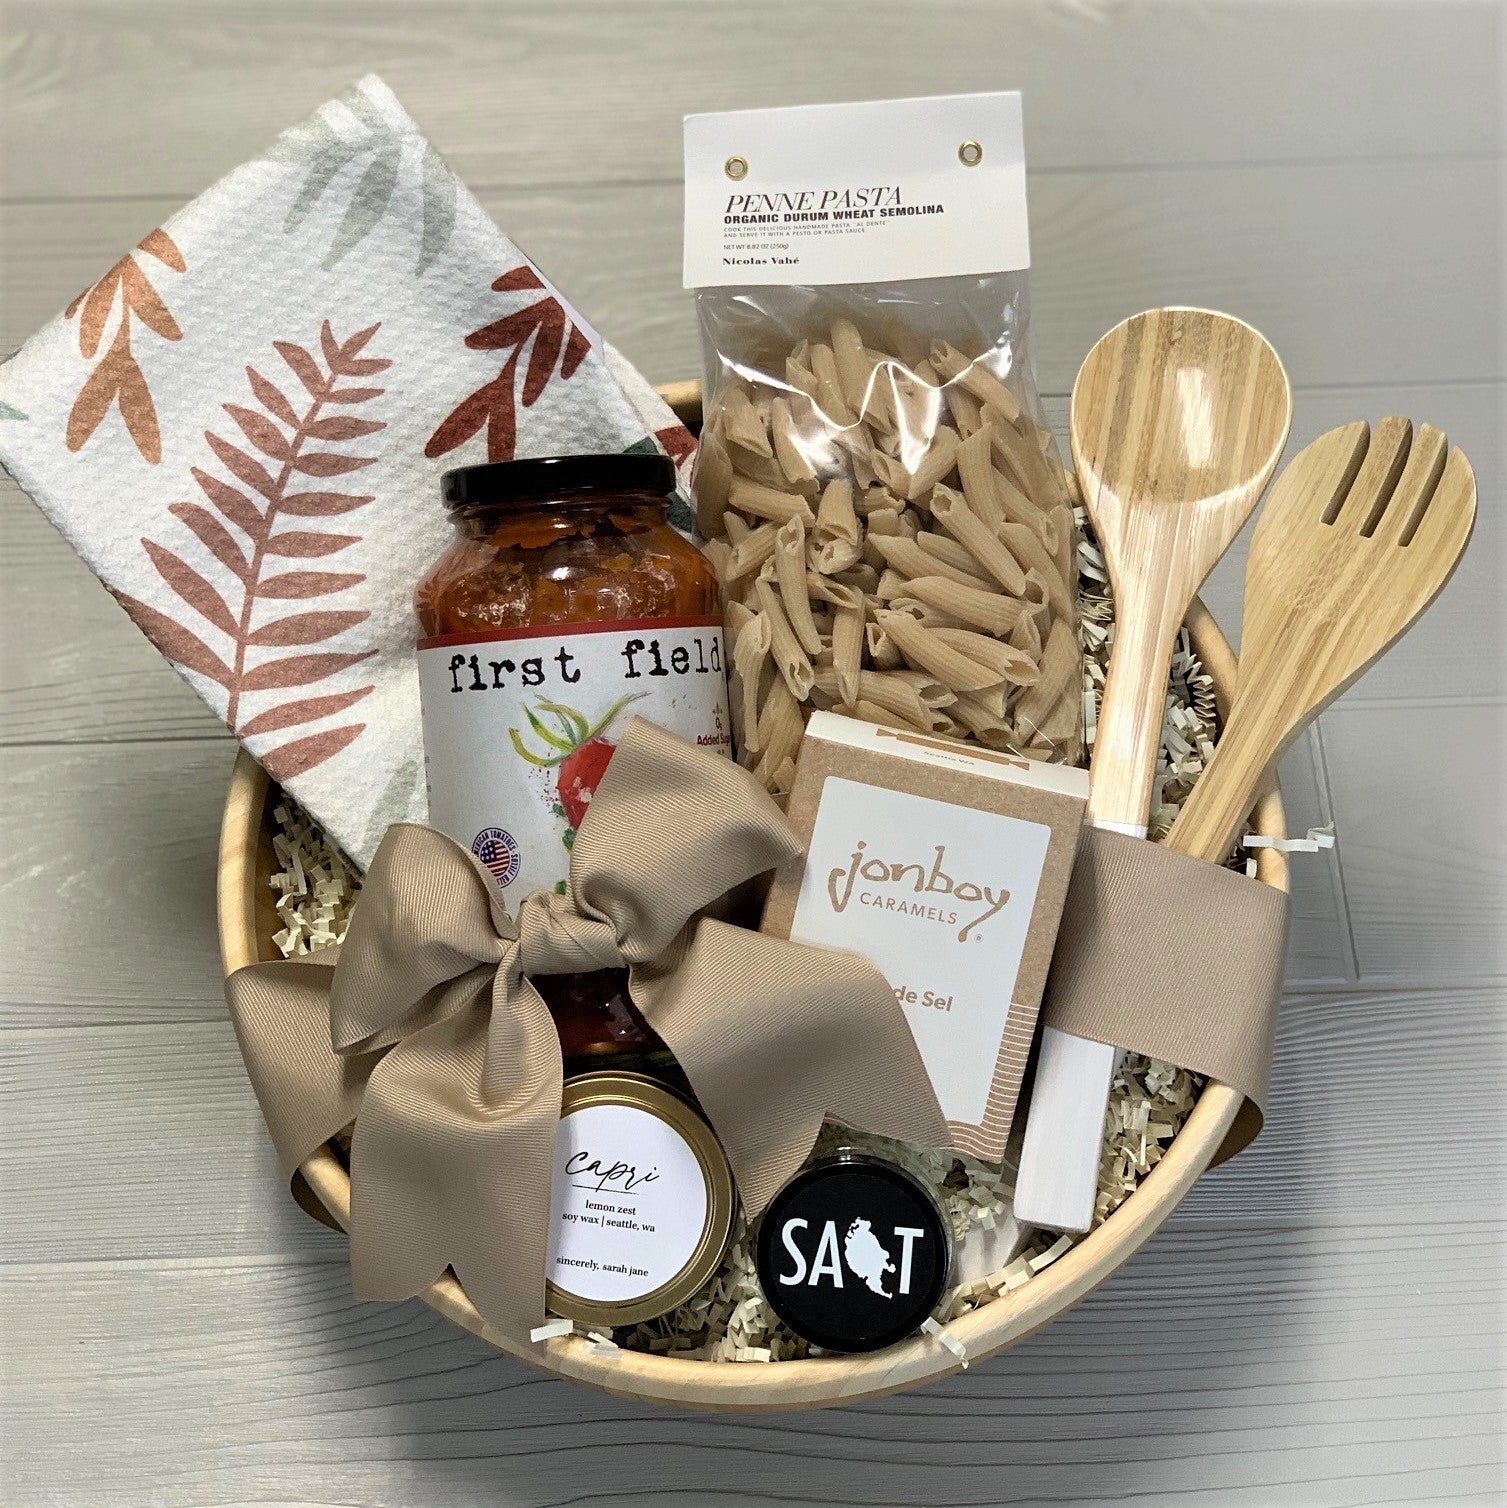 Pasta night gift basket includes pasta sauce, a kitchen towel penne pasta, serving spoons, caramel, a scented candle, and sea salt. It is packaged in a bamboo bowl.